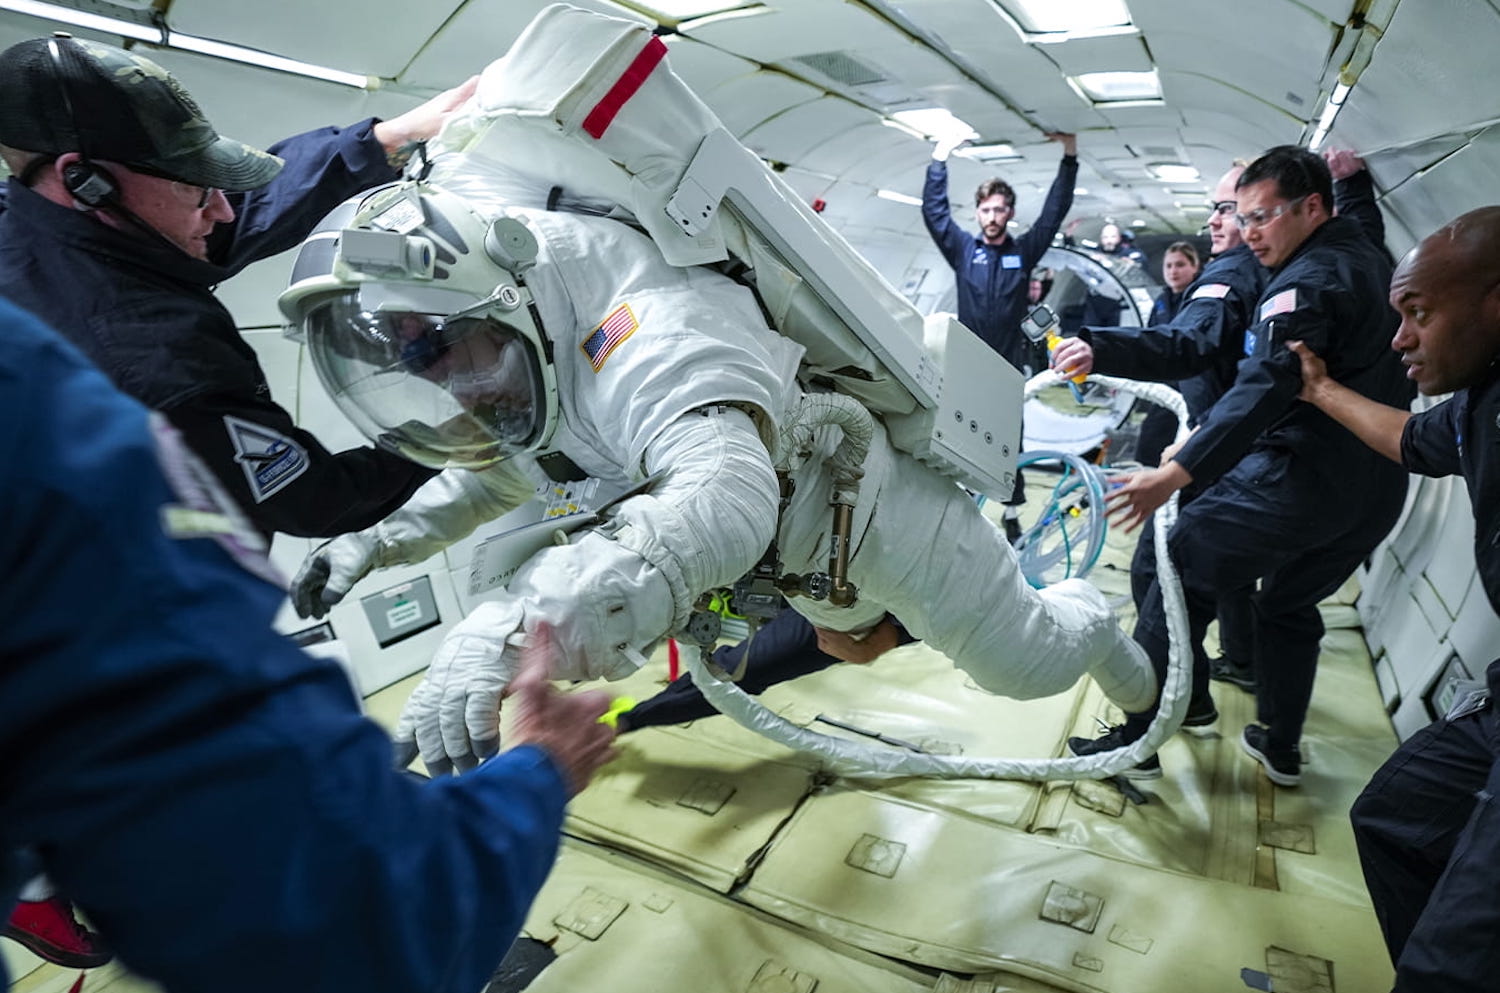 Collins Aerospace testing its new spacesuit.